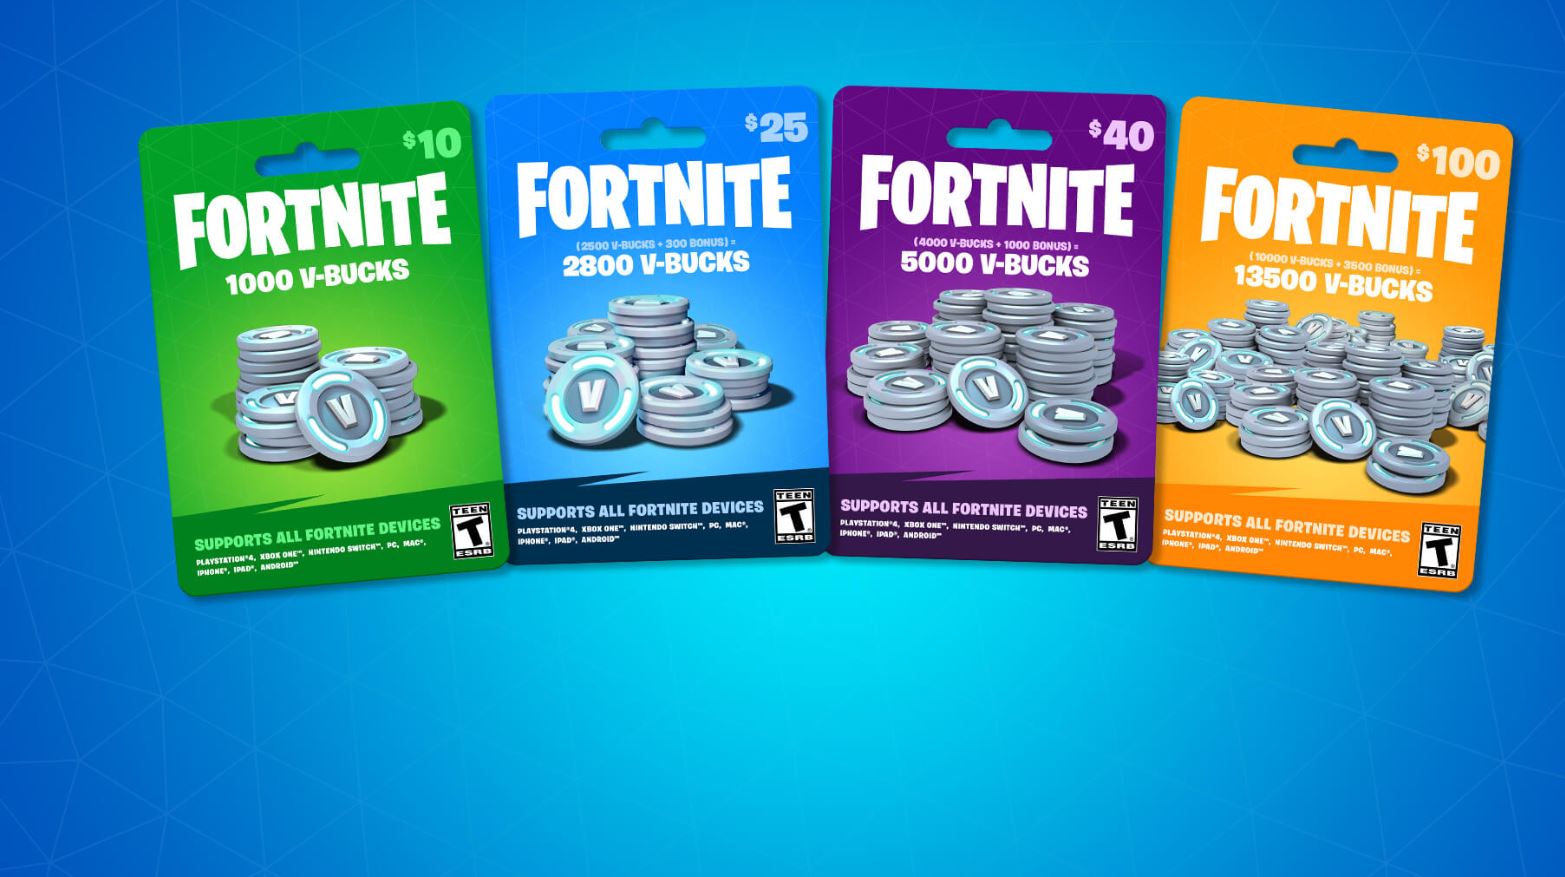 Fortnite V Bucks Gift Cards To Redeem And Buy Them Including Walmart, Target And GameStop